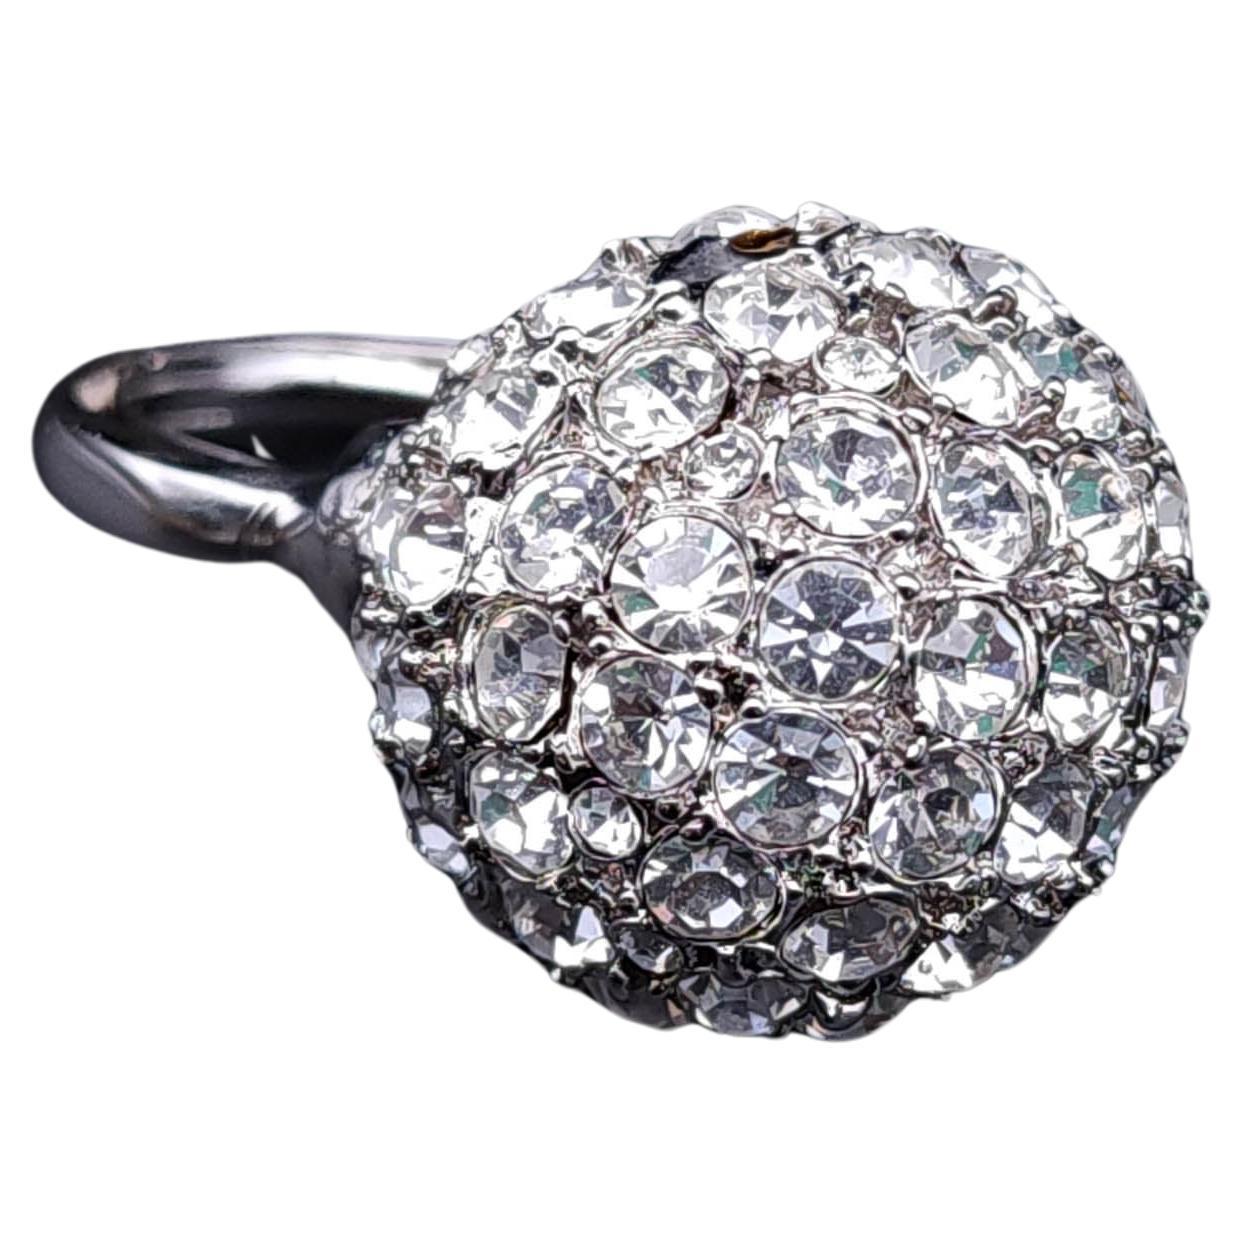 Kenneth J Lane KJL Pave Crystal Disco Ball Cocktail Ring, Silver Tone Sz 4-8 For Sale